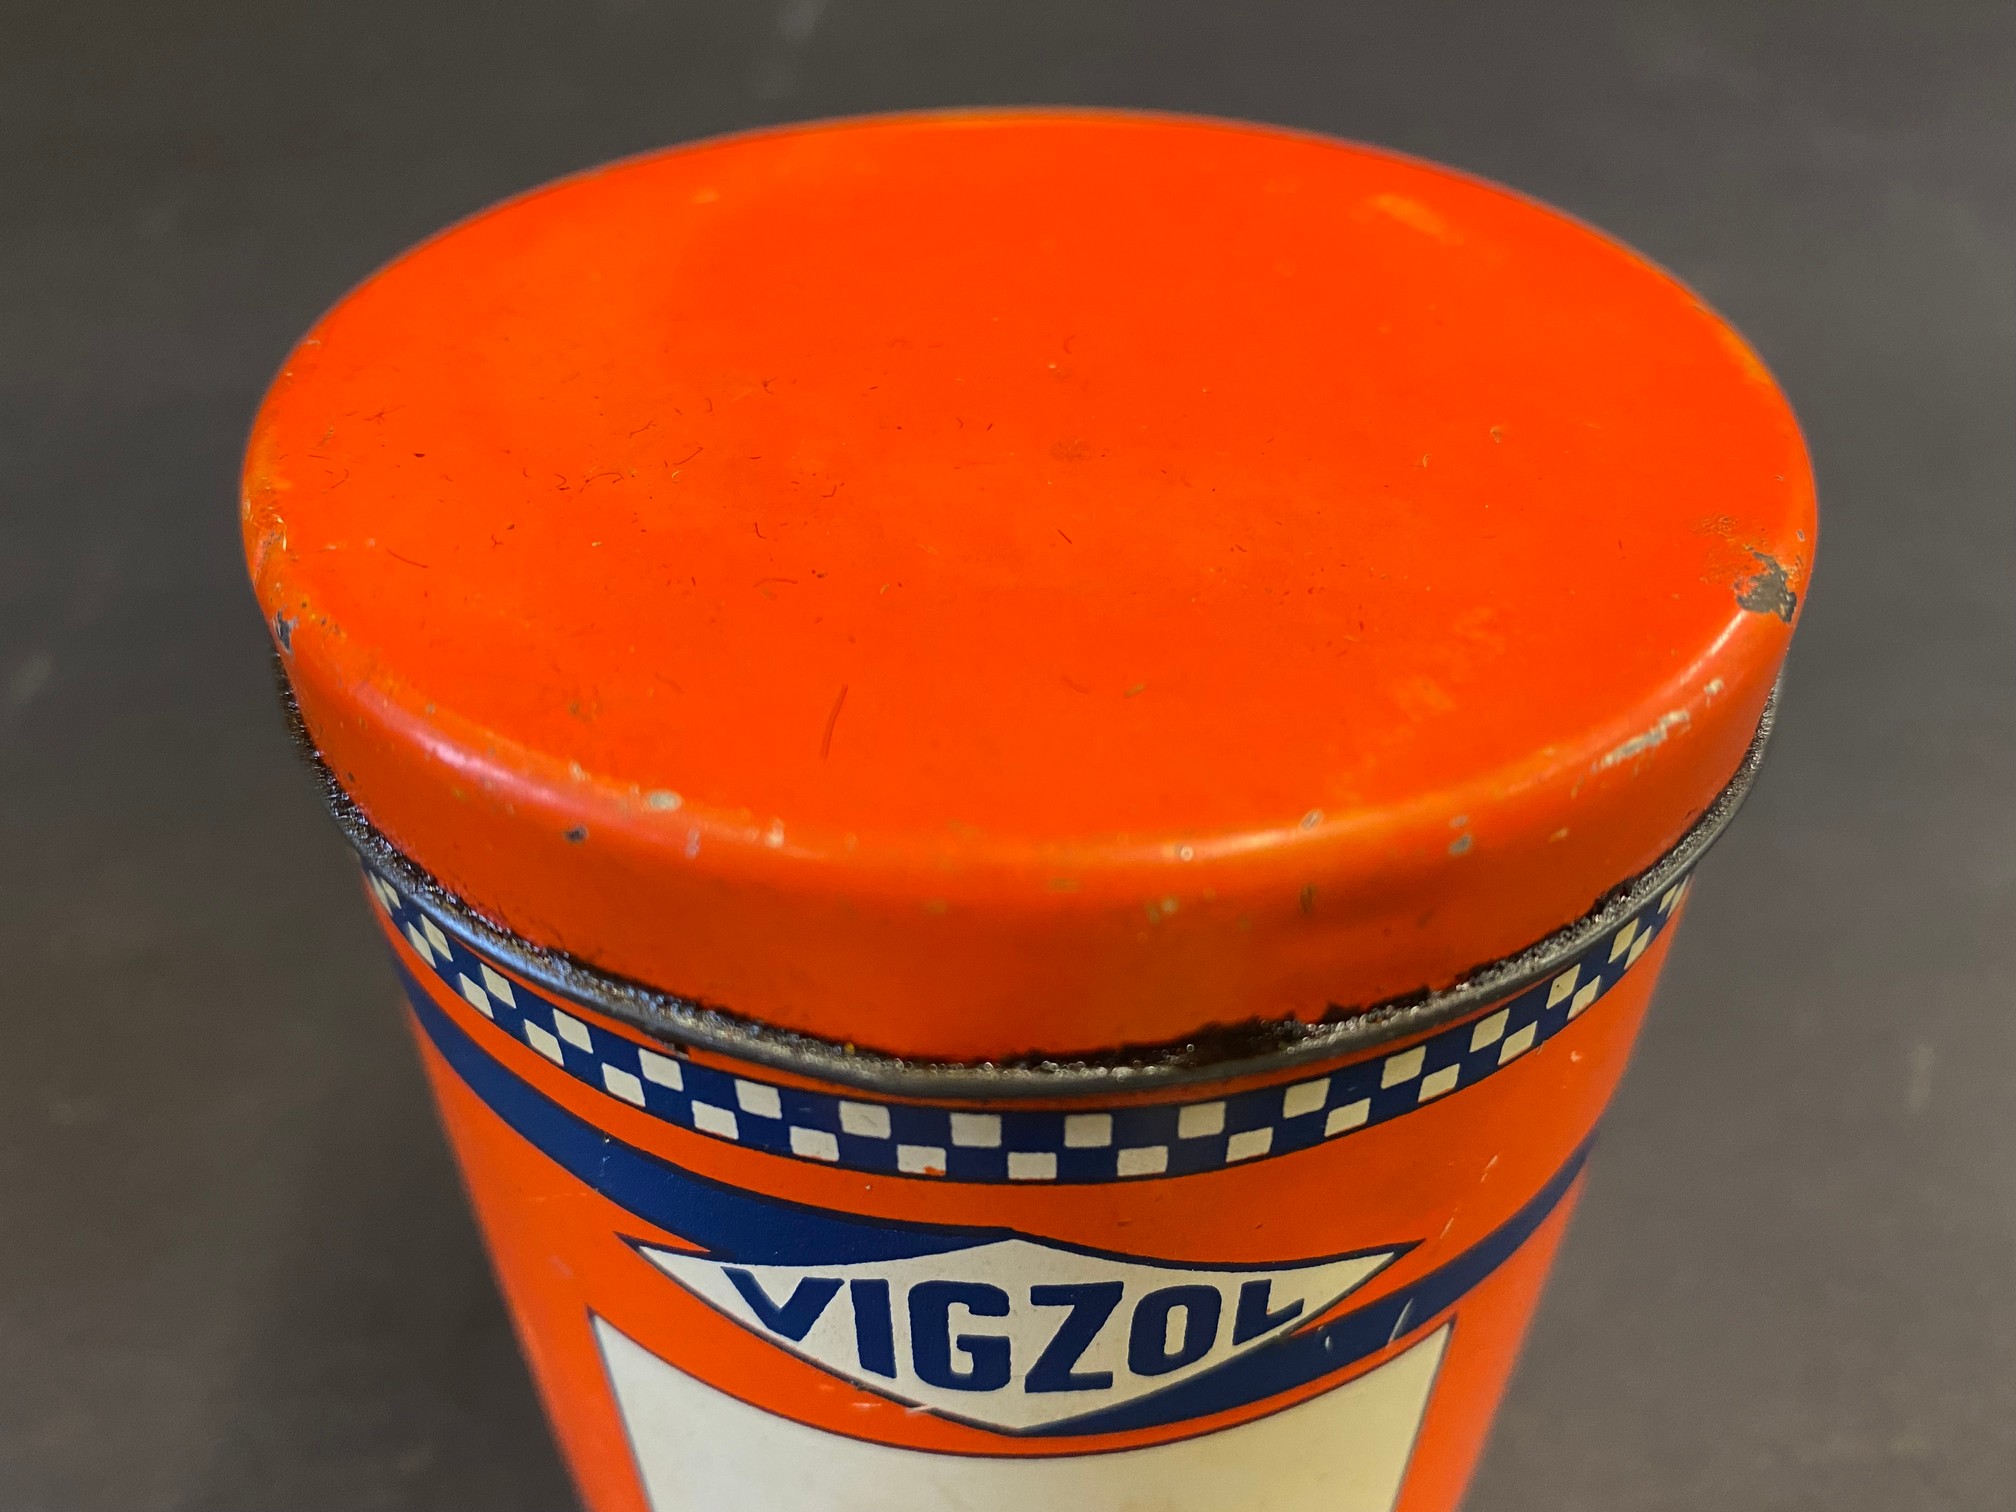 A Vigzol H.S. grease 1lb tin, in good condition. - Image 3 of 4